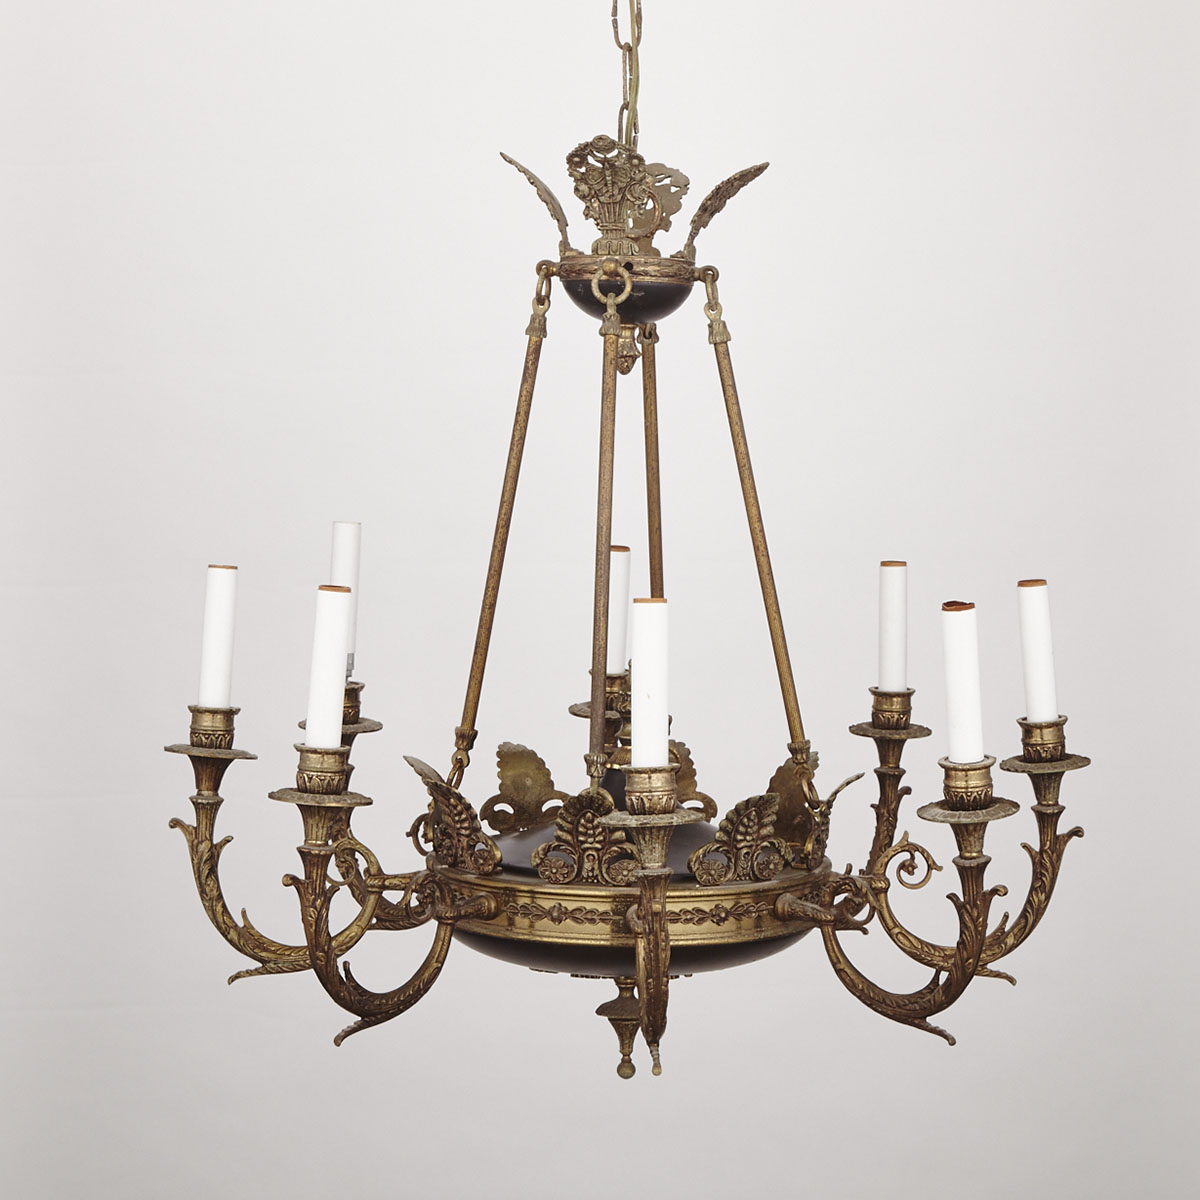 French Gilt and Black Lacquered Metal Empire Style Eight Light Chandelier, early 20th century